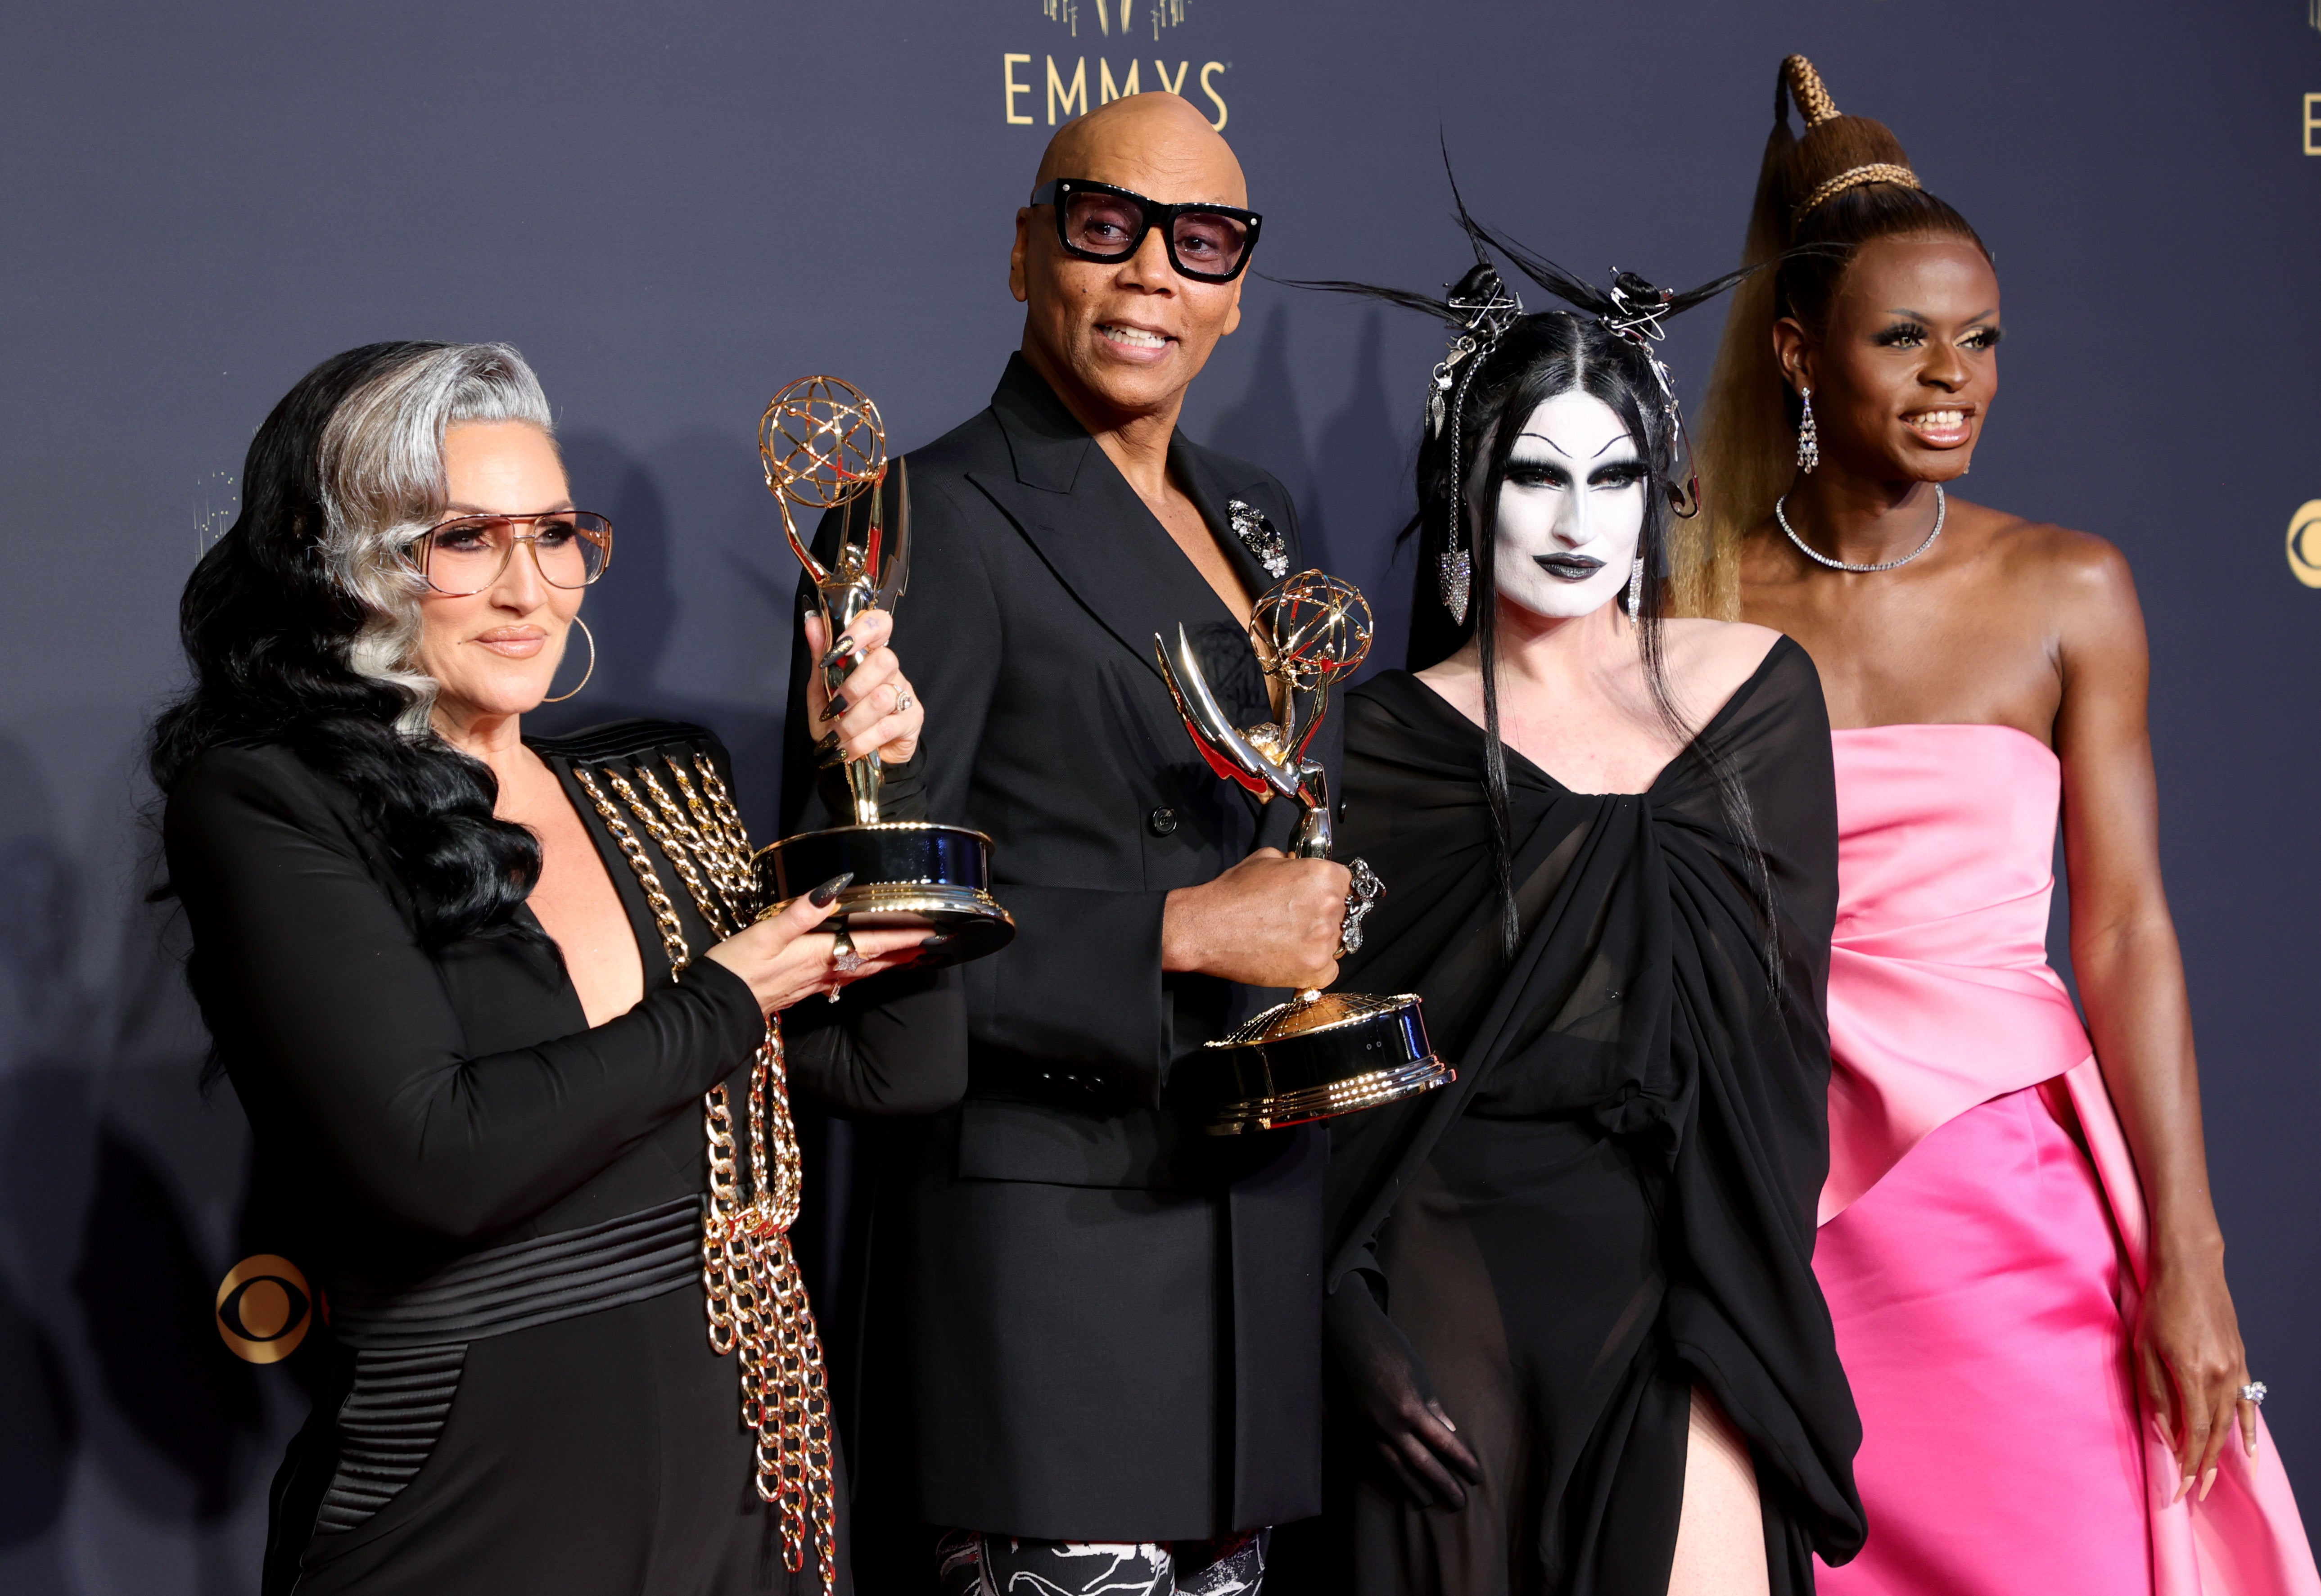 Visage (left) with RuPaul and ‘Drag Race’ stars Gottmik and Symone at the 2021 Emmys